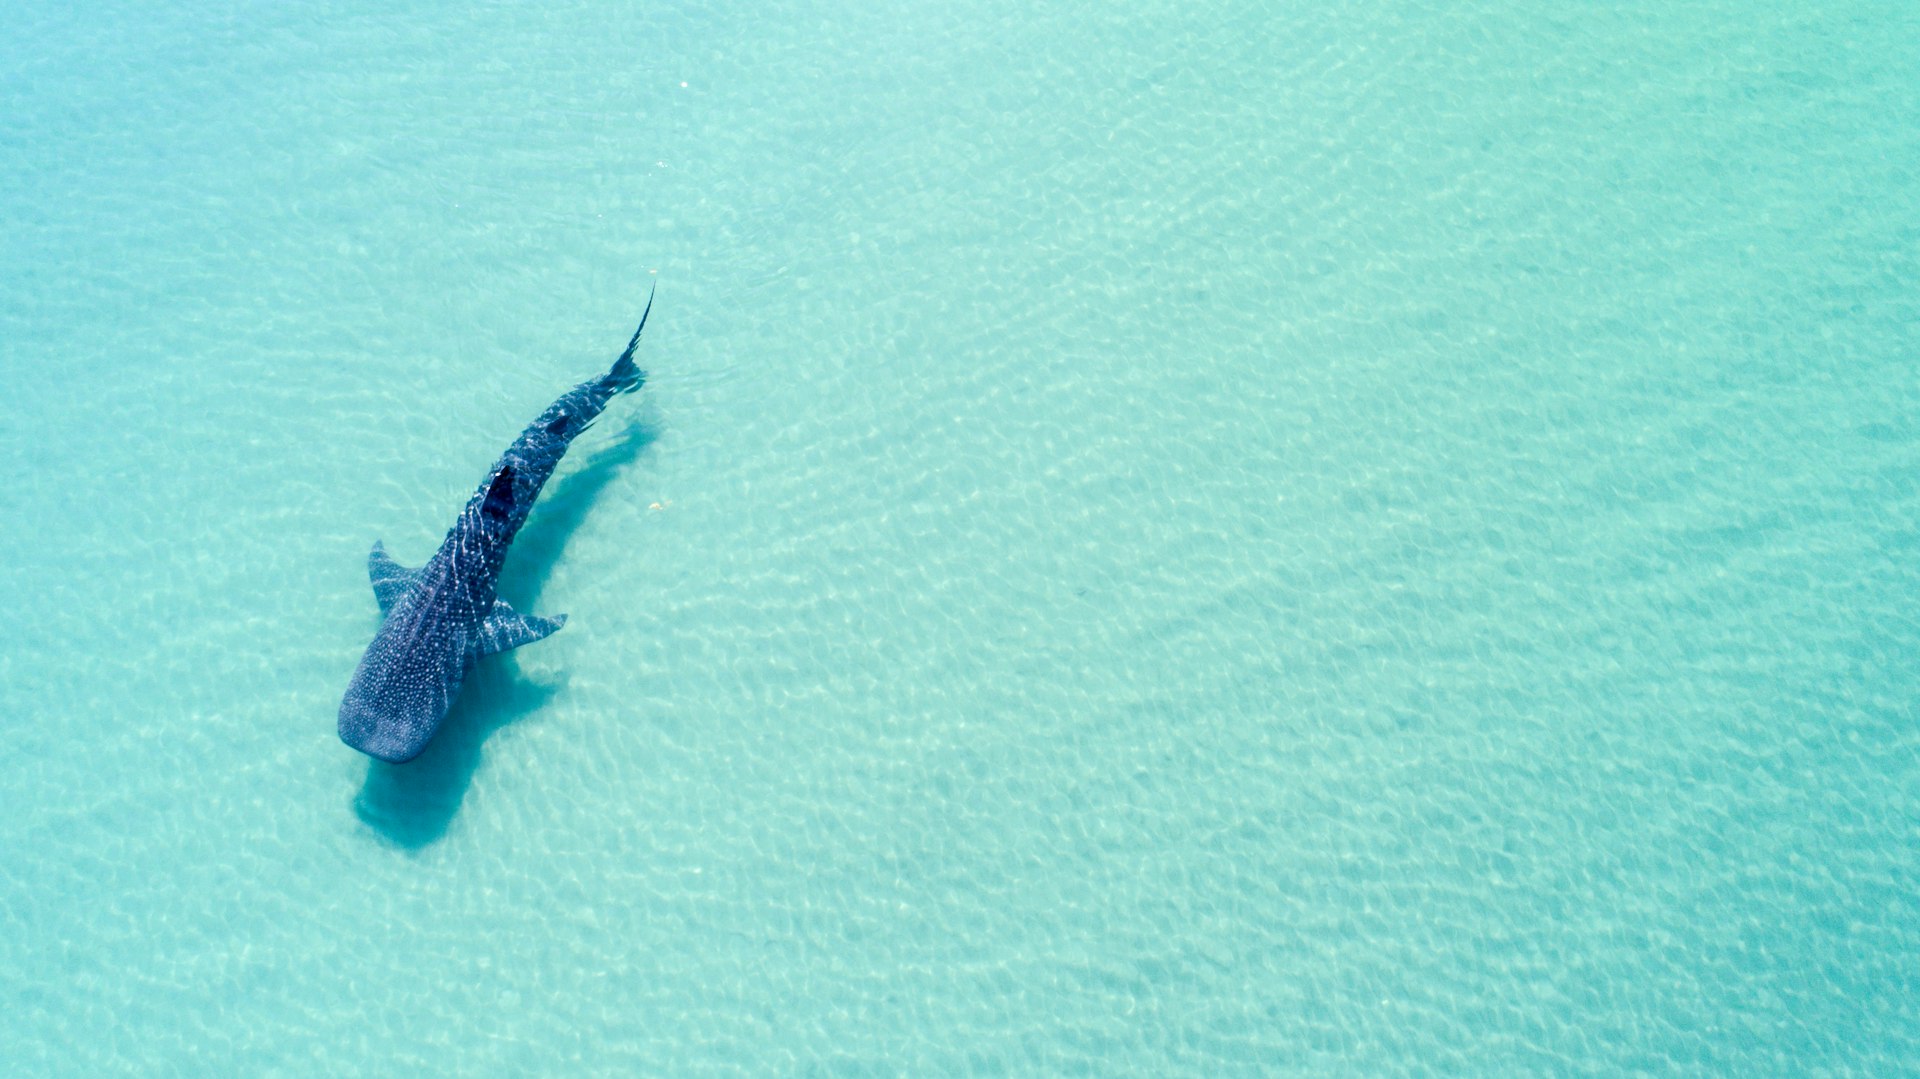 A whale shark (rhincodon typus), the biggest fish in the ocean, seen from above in the waters off of La Pas, Baja California Sur